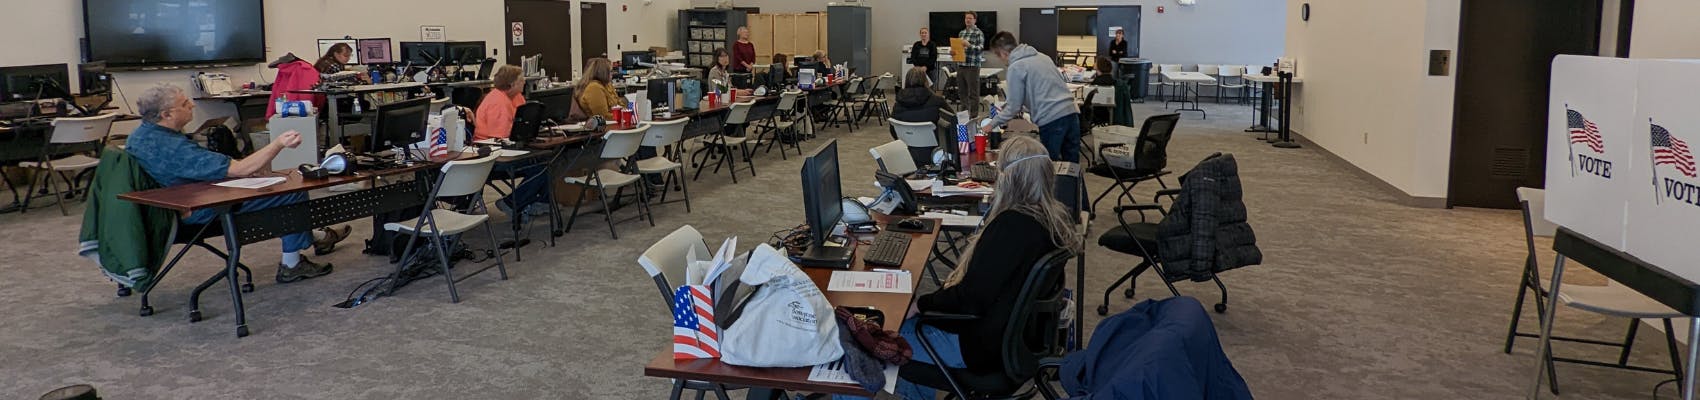 View of Missoula County Elections Center before an election, with staff sitting at tables